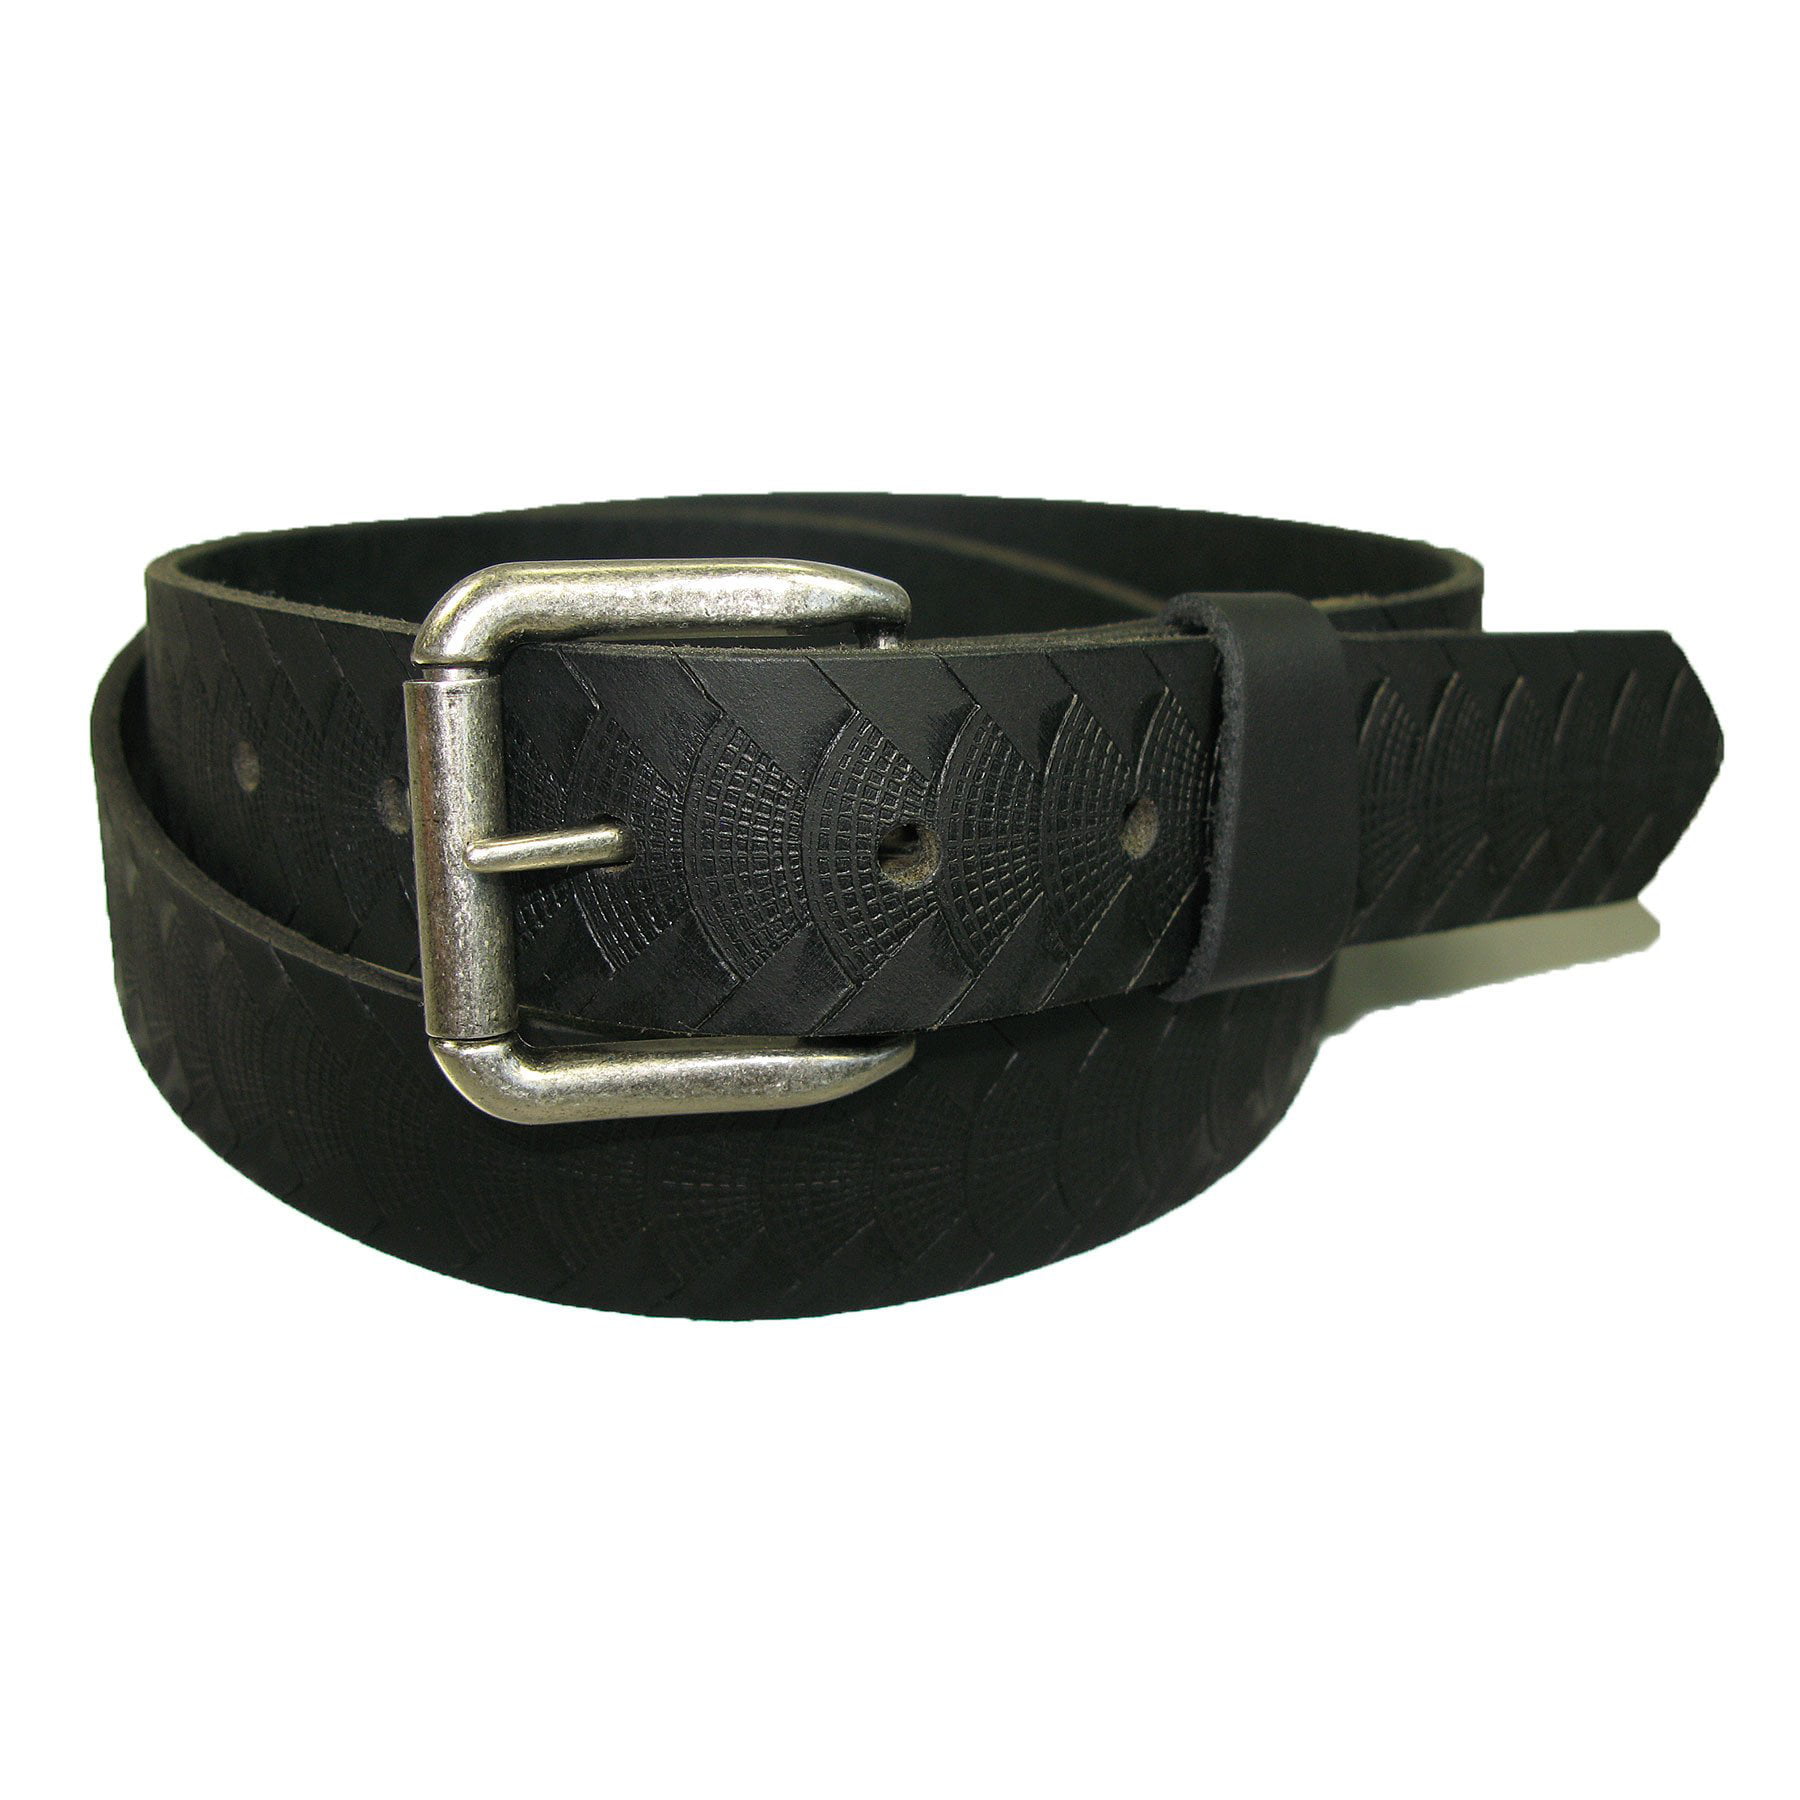 New Classic Plain Surface Dark Coffee Color Solid Genuine Real Leather Belt